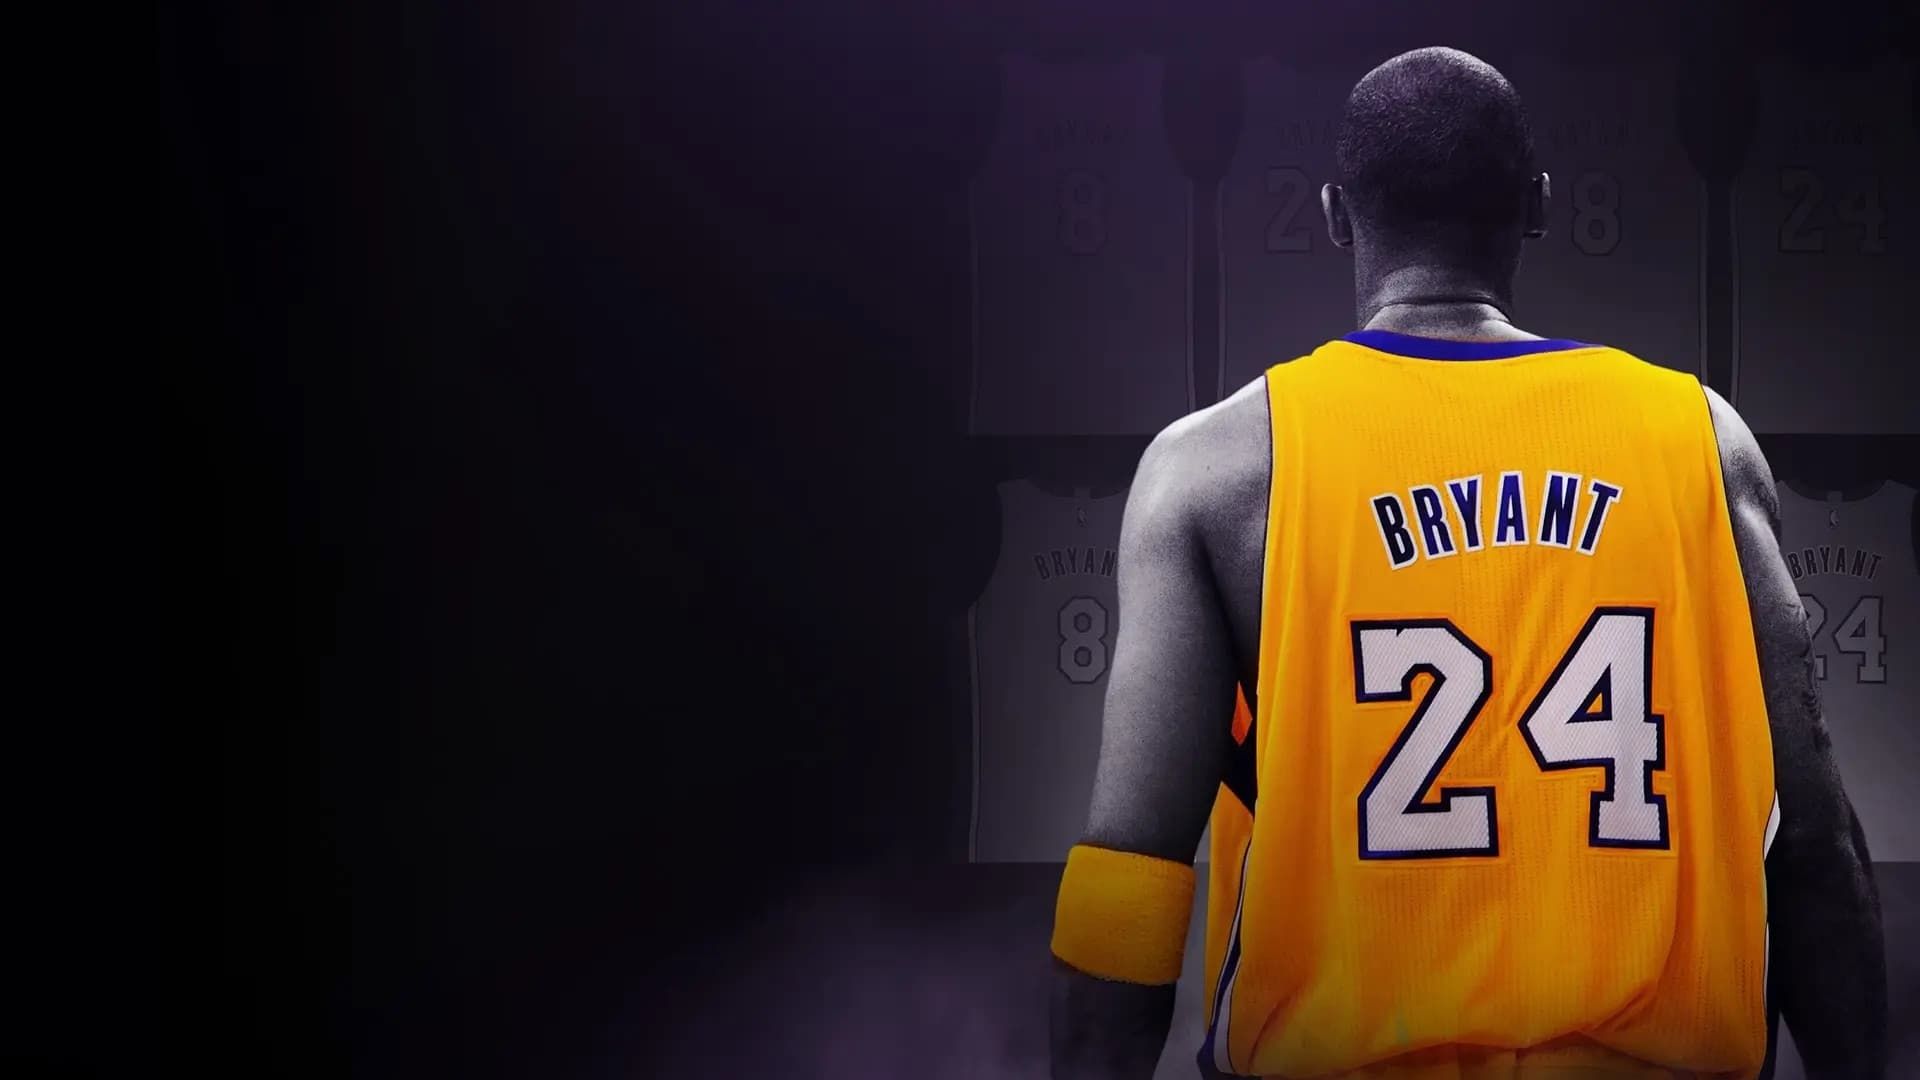 Gone Before His Time: Kobe Bryant background